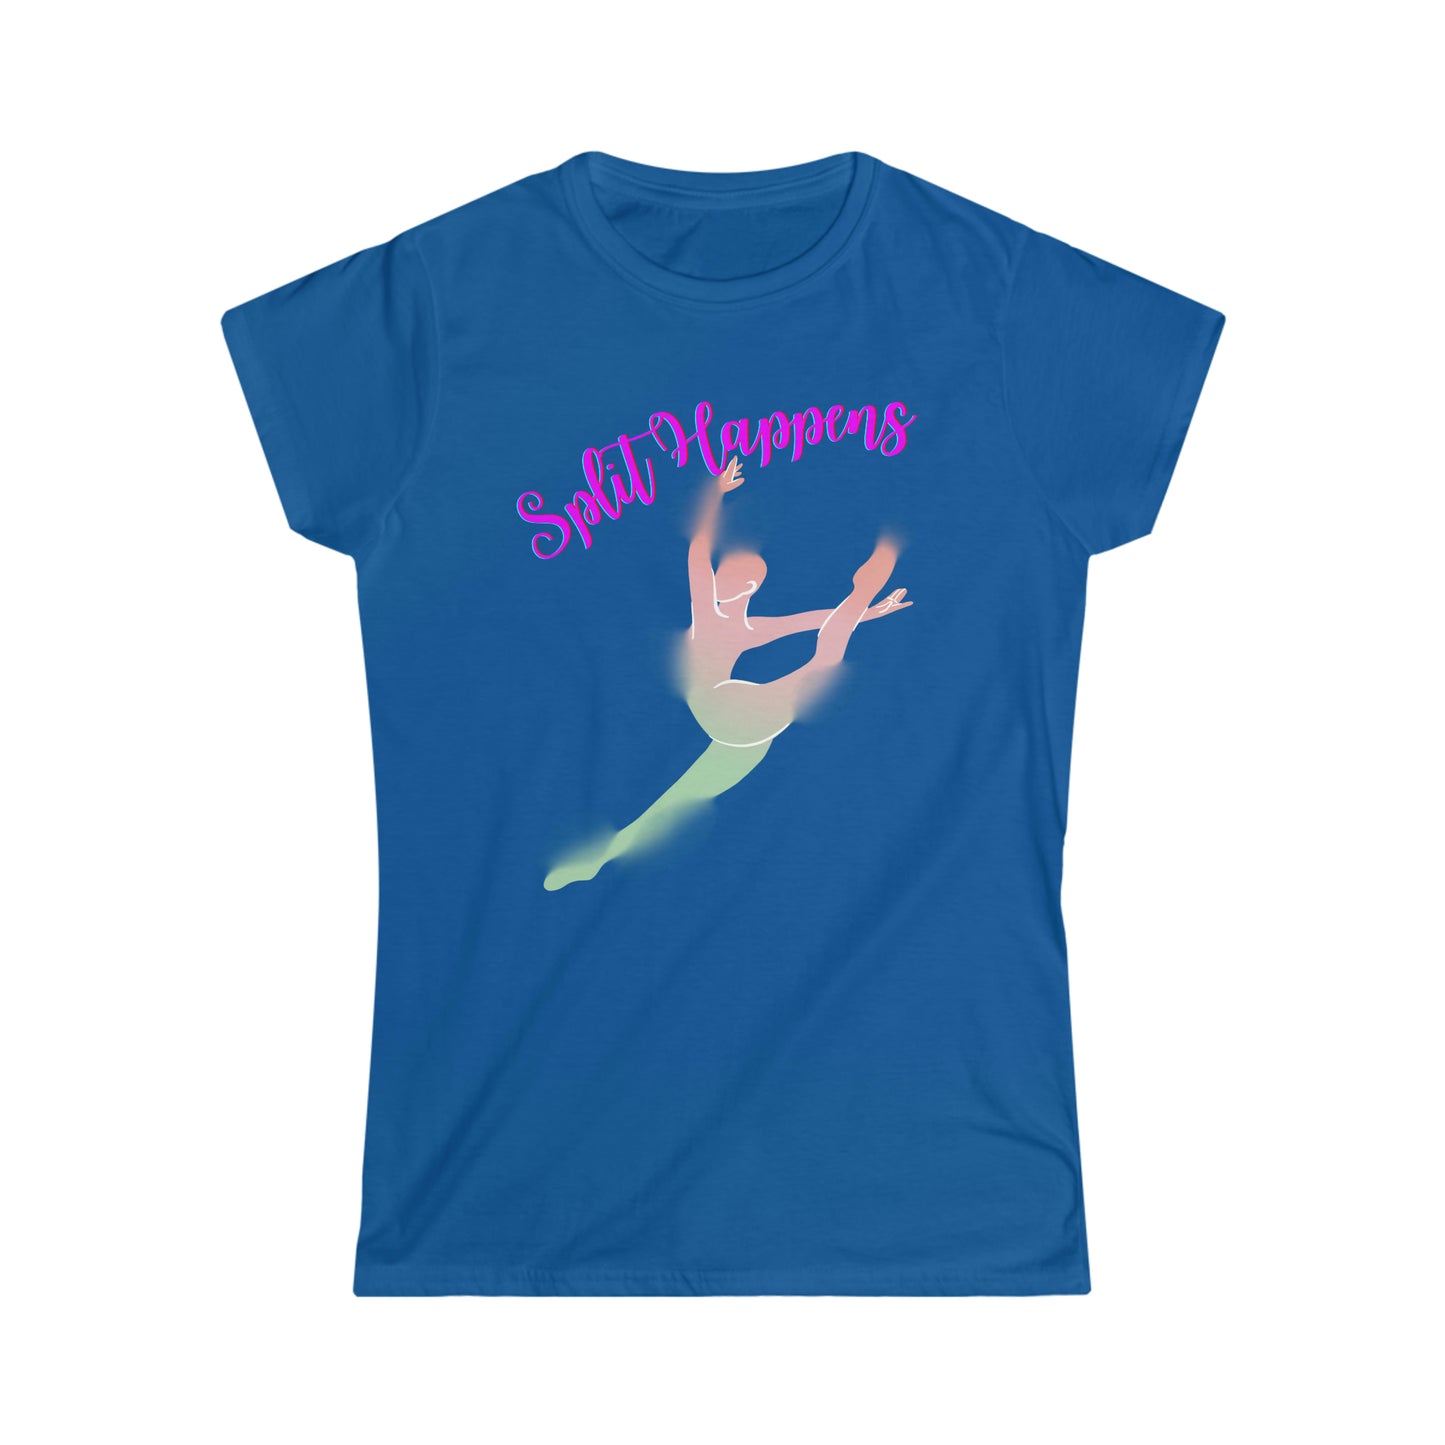 A ballet dance tshirt with the text "Split happens" and a picture of a ballerina doing the splits. The best of all dance t shirts for ballerinas!